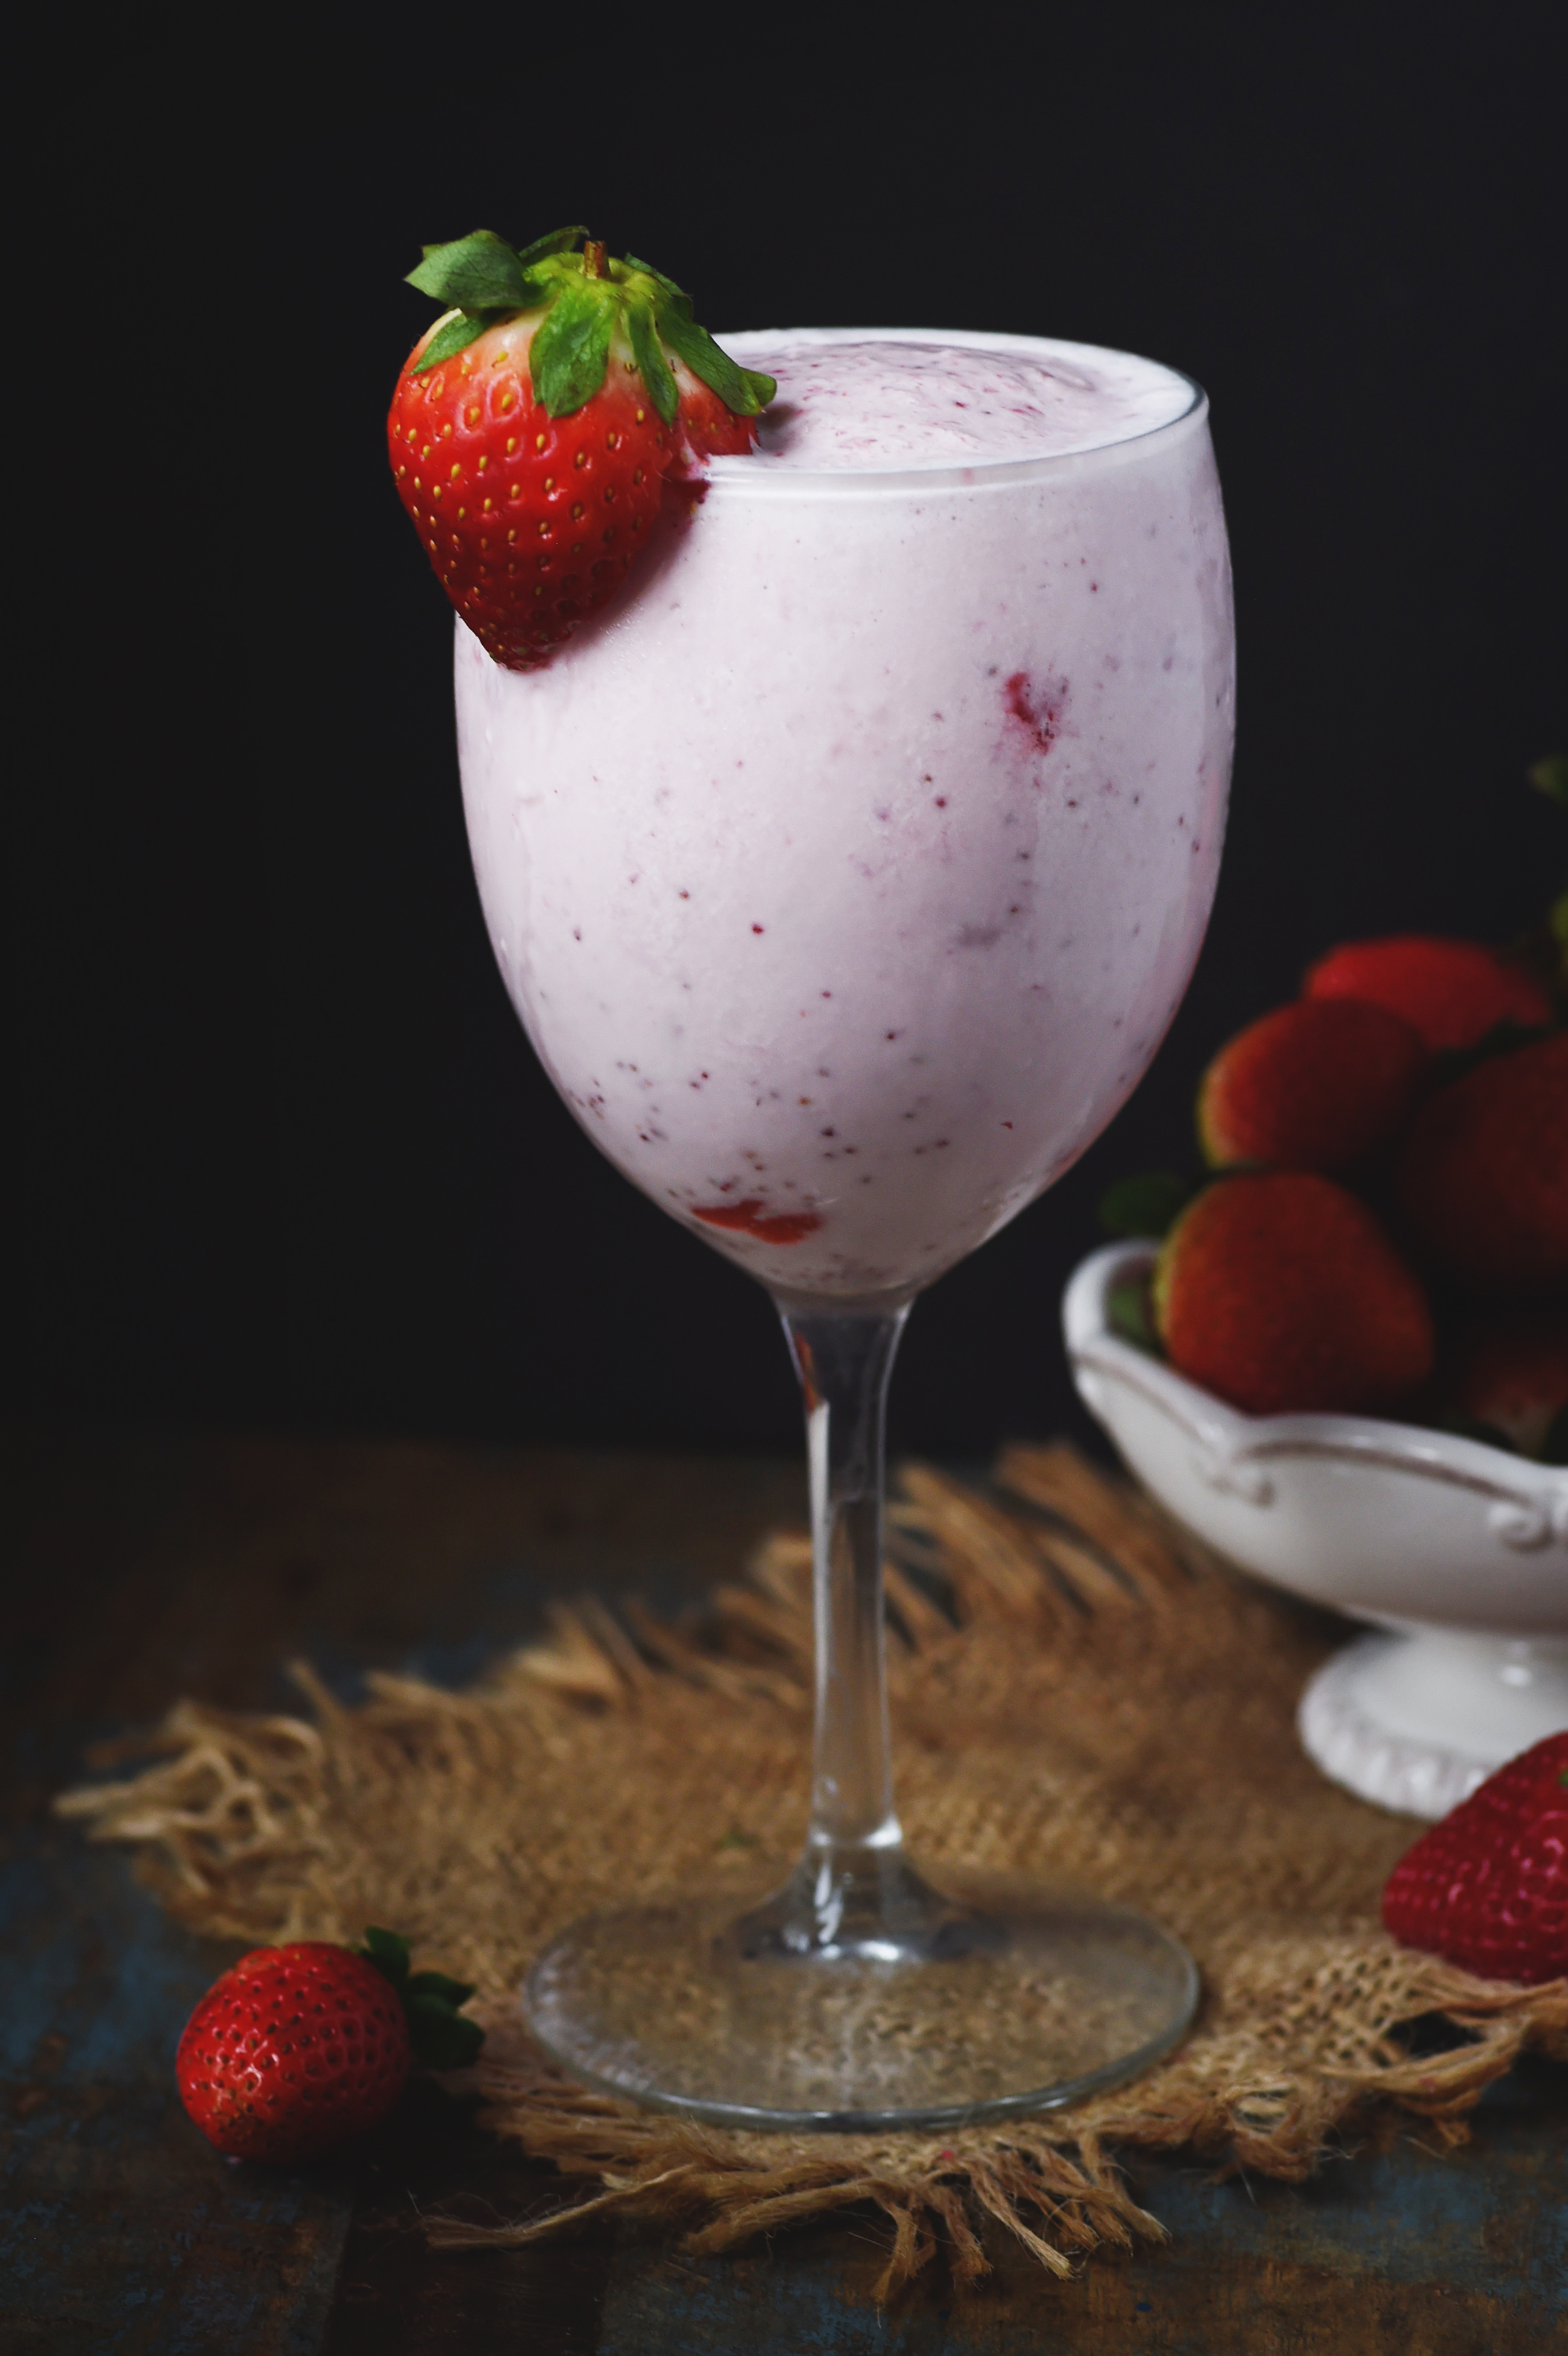 Low-Carb Strawberry Smoothie in a wine glass with a strawberry garnish.